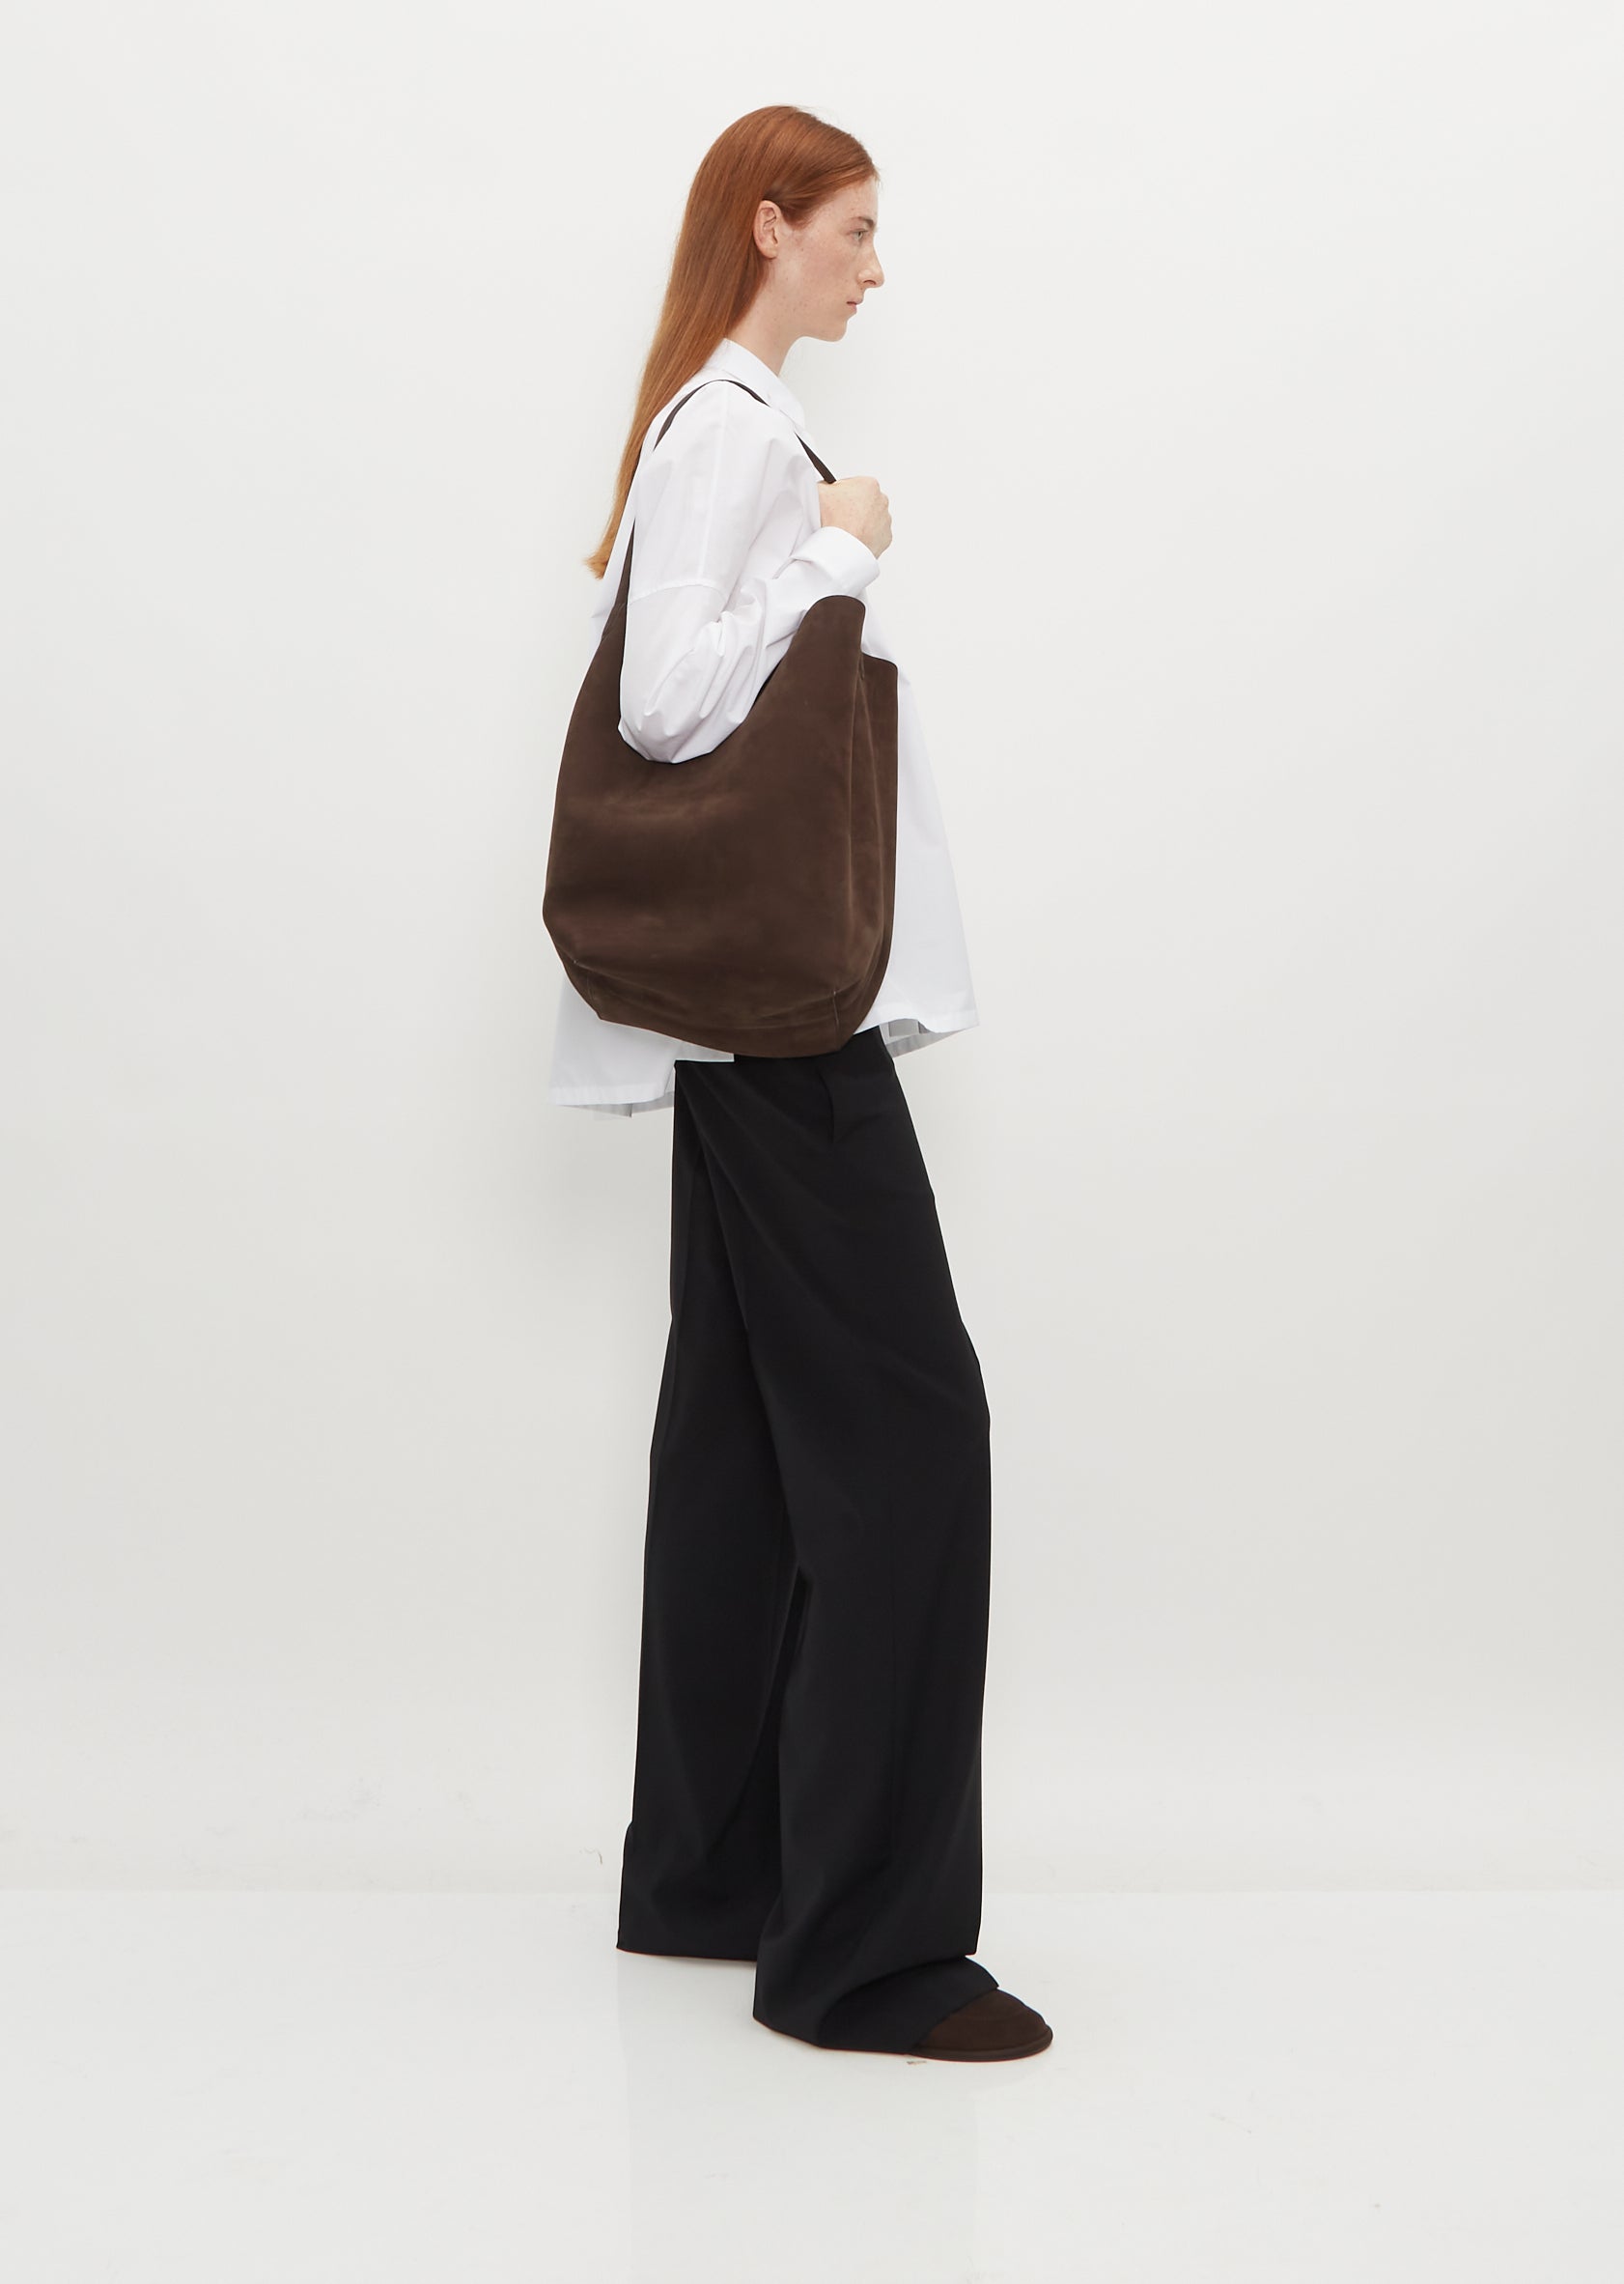 Park Large Nylon Tote Bag in Brown - The Row